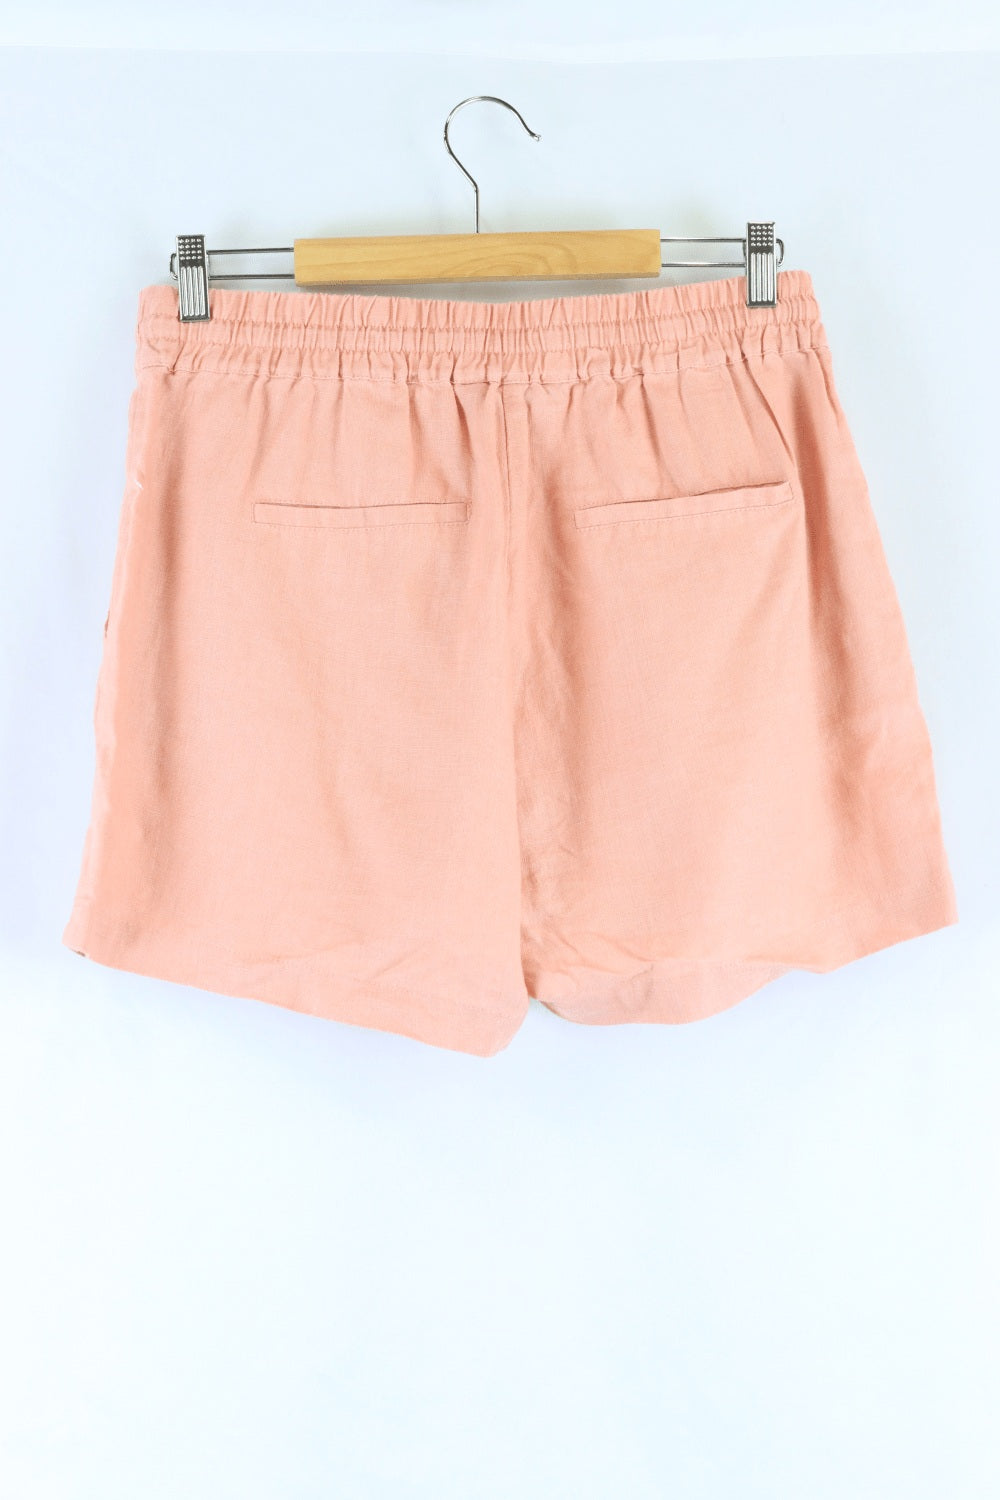 French Connection Pink Shorts 10